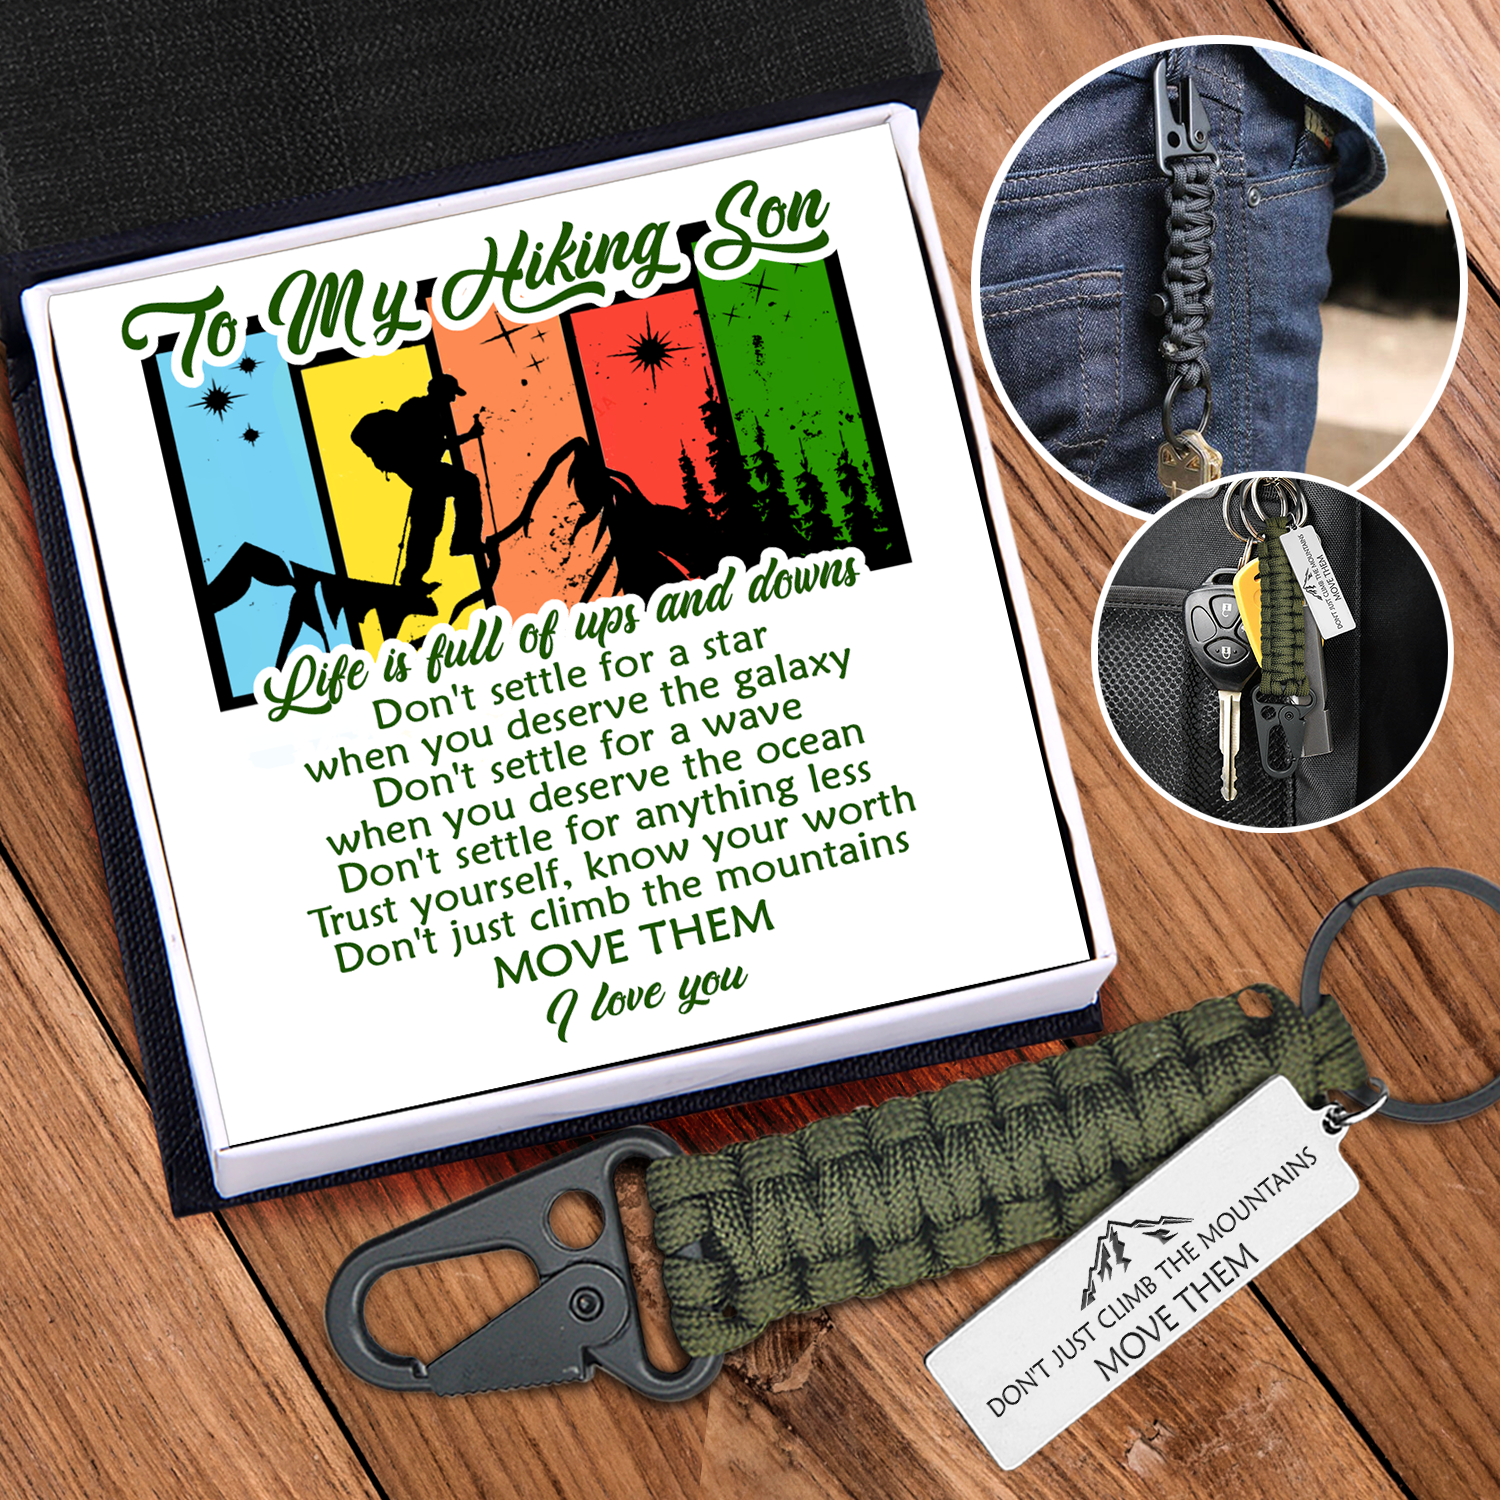 Paracord Keychain - Hiking - To My Son - Trust Yourself, Know Your Worth - Ukgkqe16001